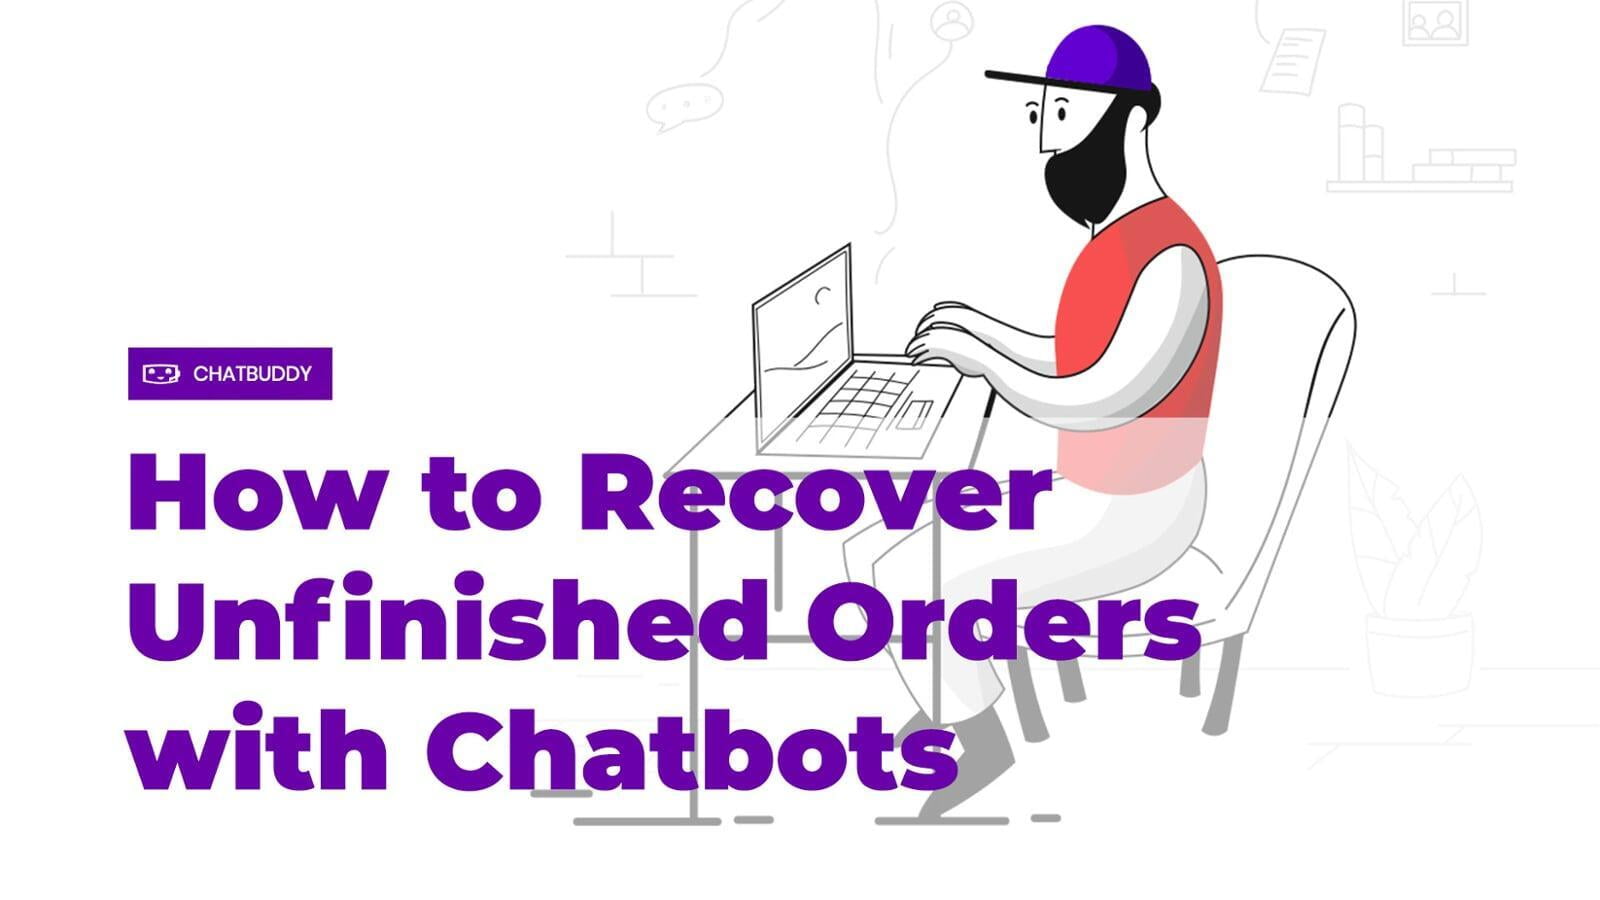 How to Recover Unfinished Orders with Chatbots